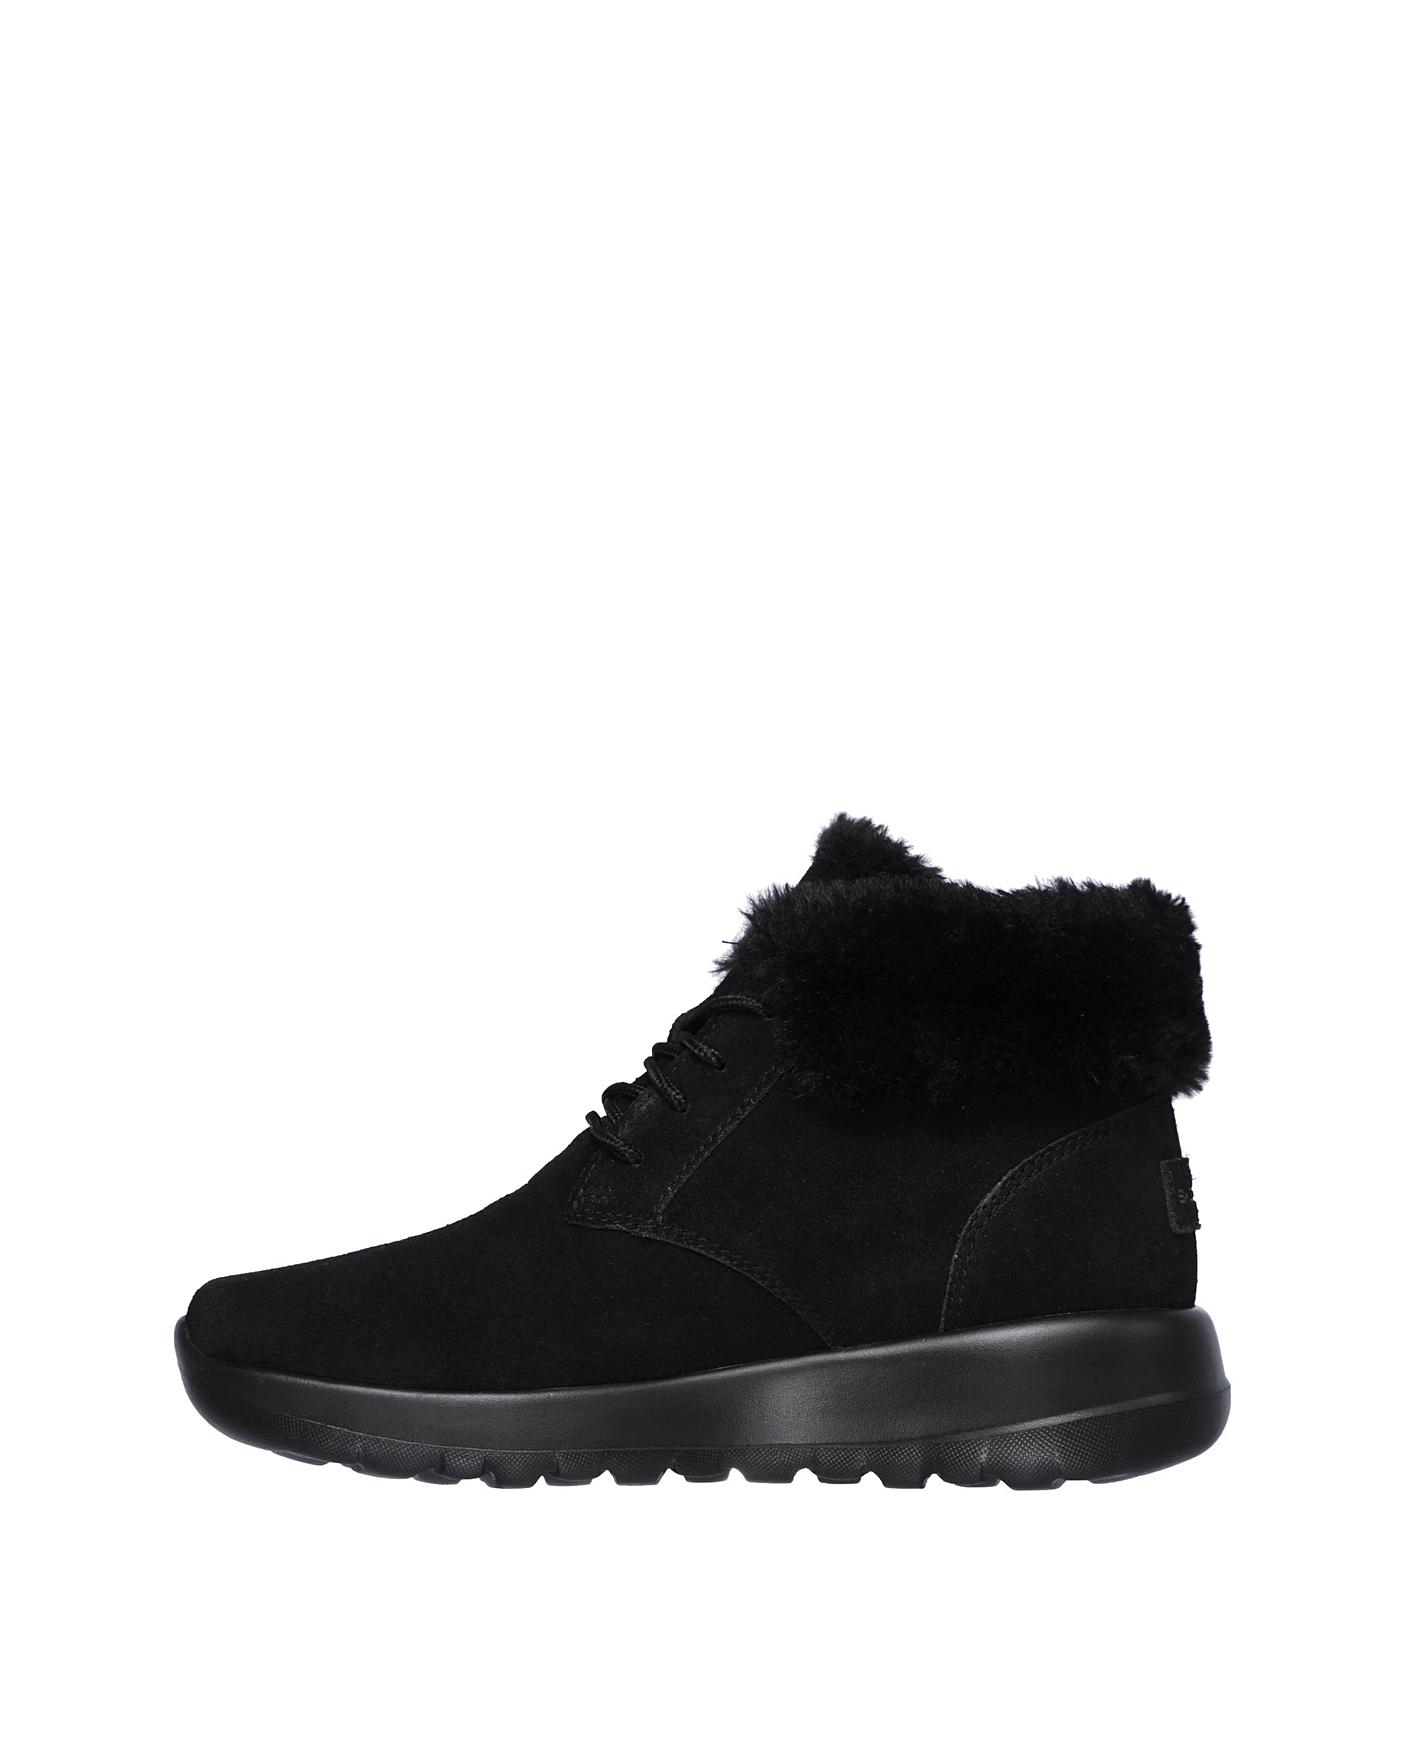 Skechers Lush Lace Up Boots Wide Fit | J D Williams